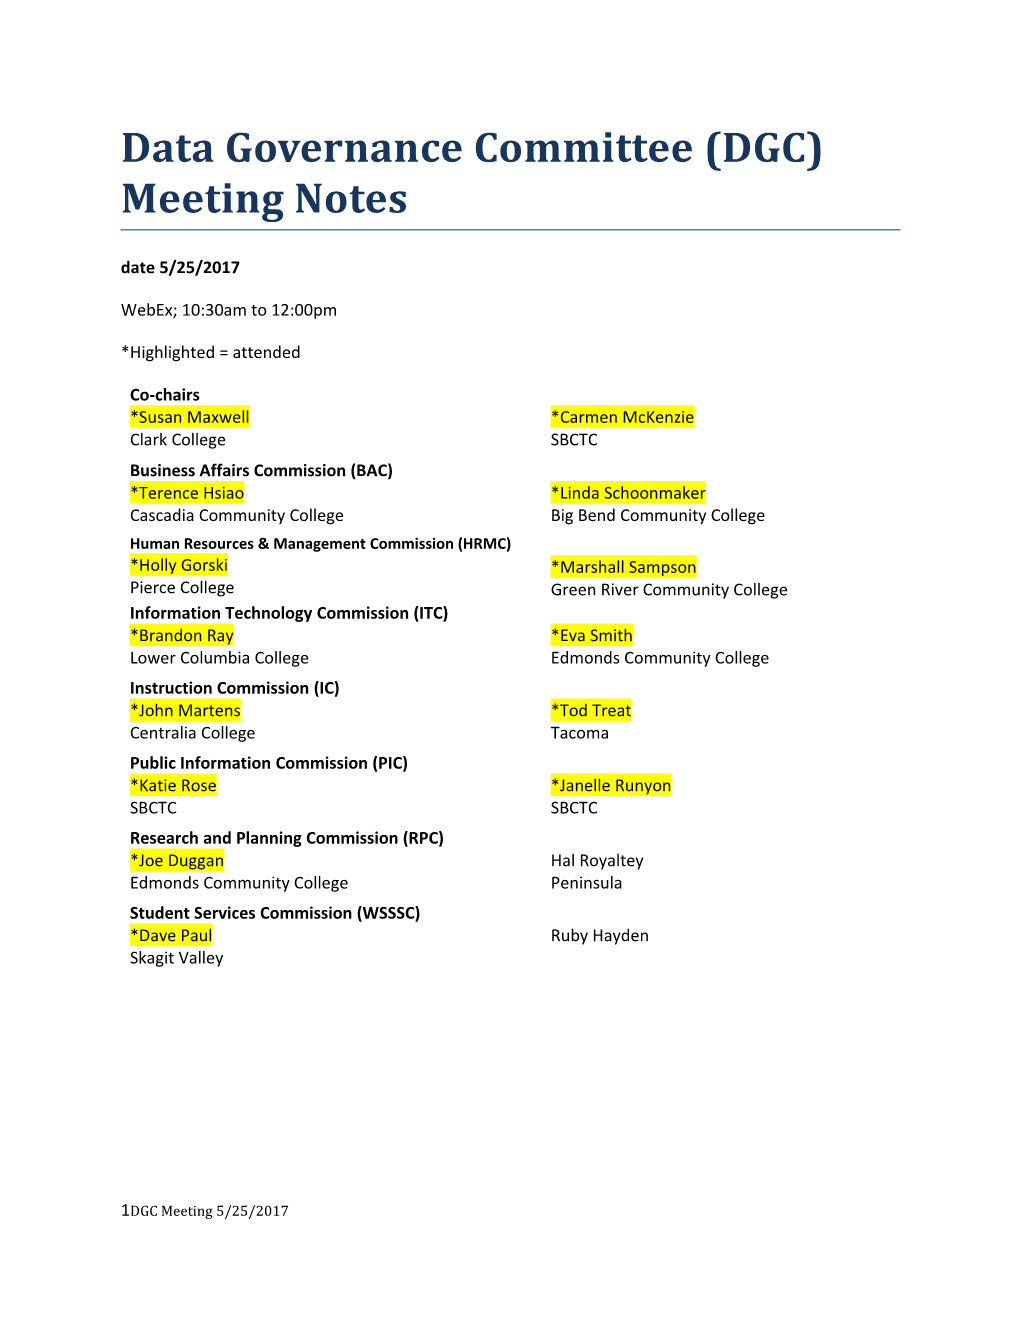 Data Governance Committee (DGC)Meeting Notes